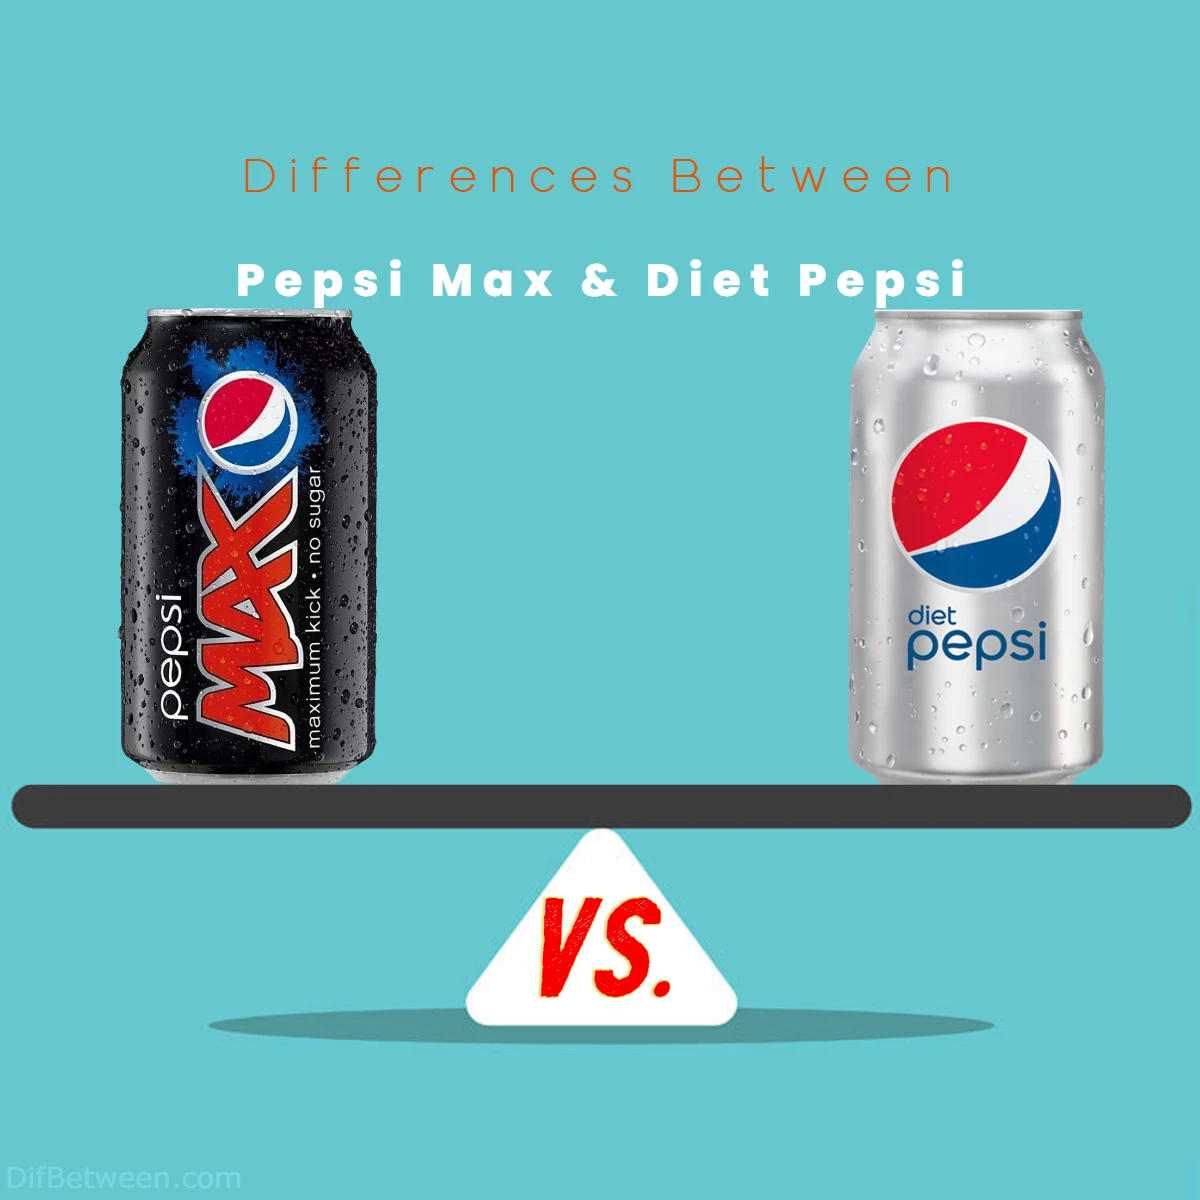 Differences Between Diet Pepsi and Pepsi Max